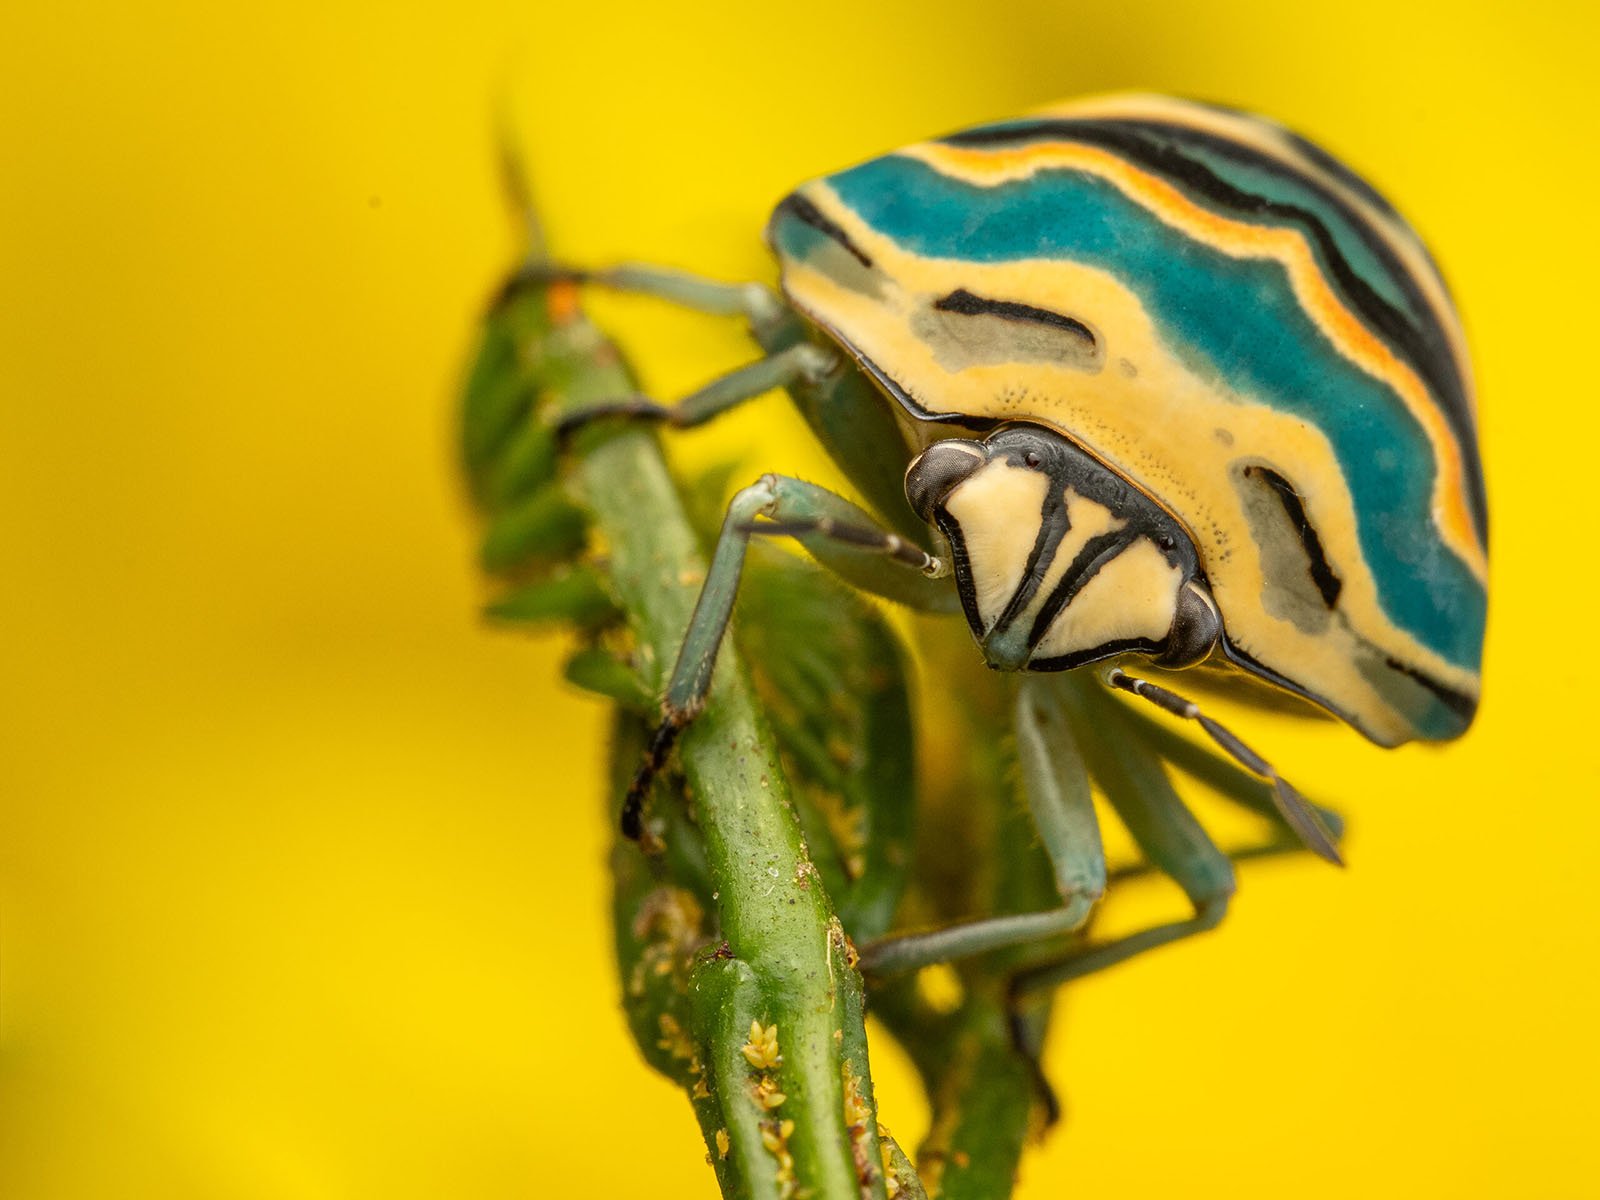 Close-up of a vibrant shield bug on a green plant. The bug has a distinctive pattern of blue, yellow, and black stripes on its back, contrasting against a blurred yellow background. The intricate colors and textures are clearly visible.